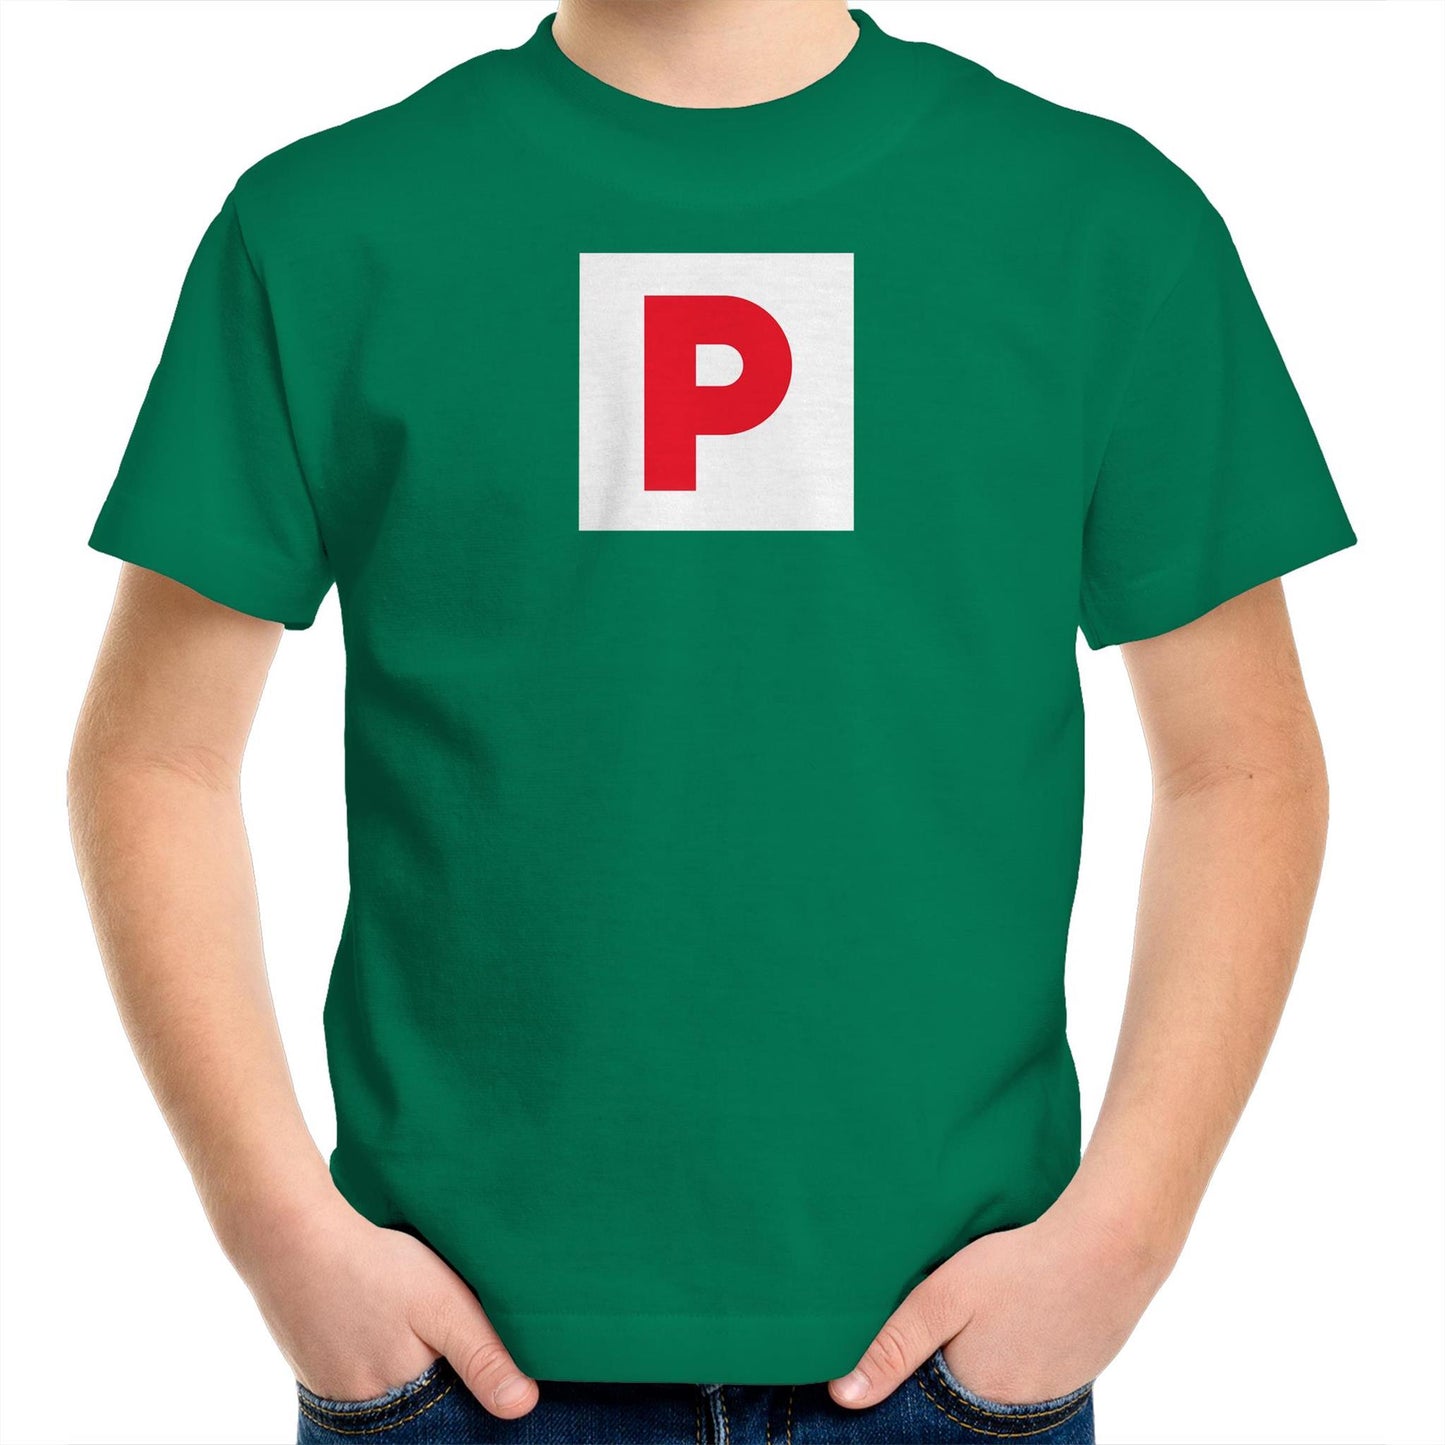 P Plate T Shirts for Kids